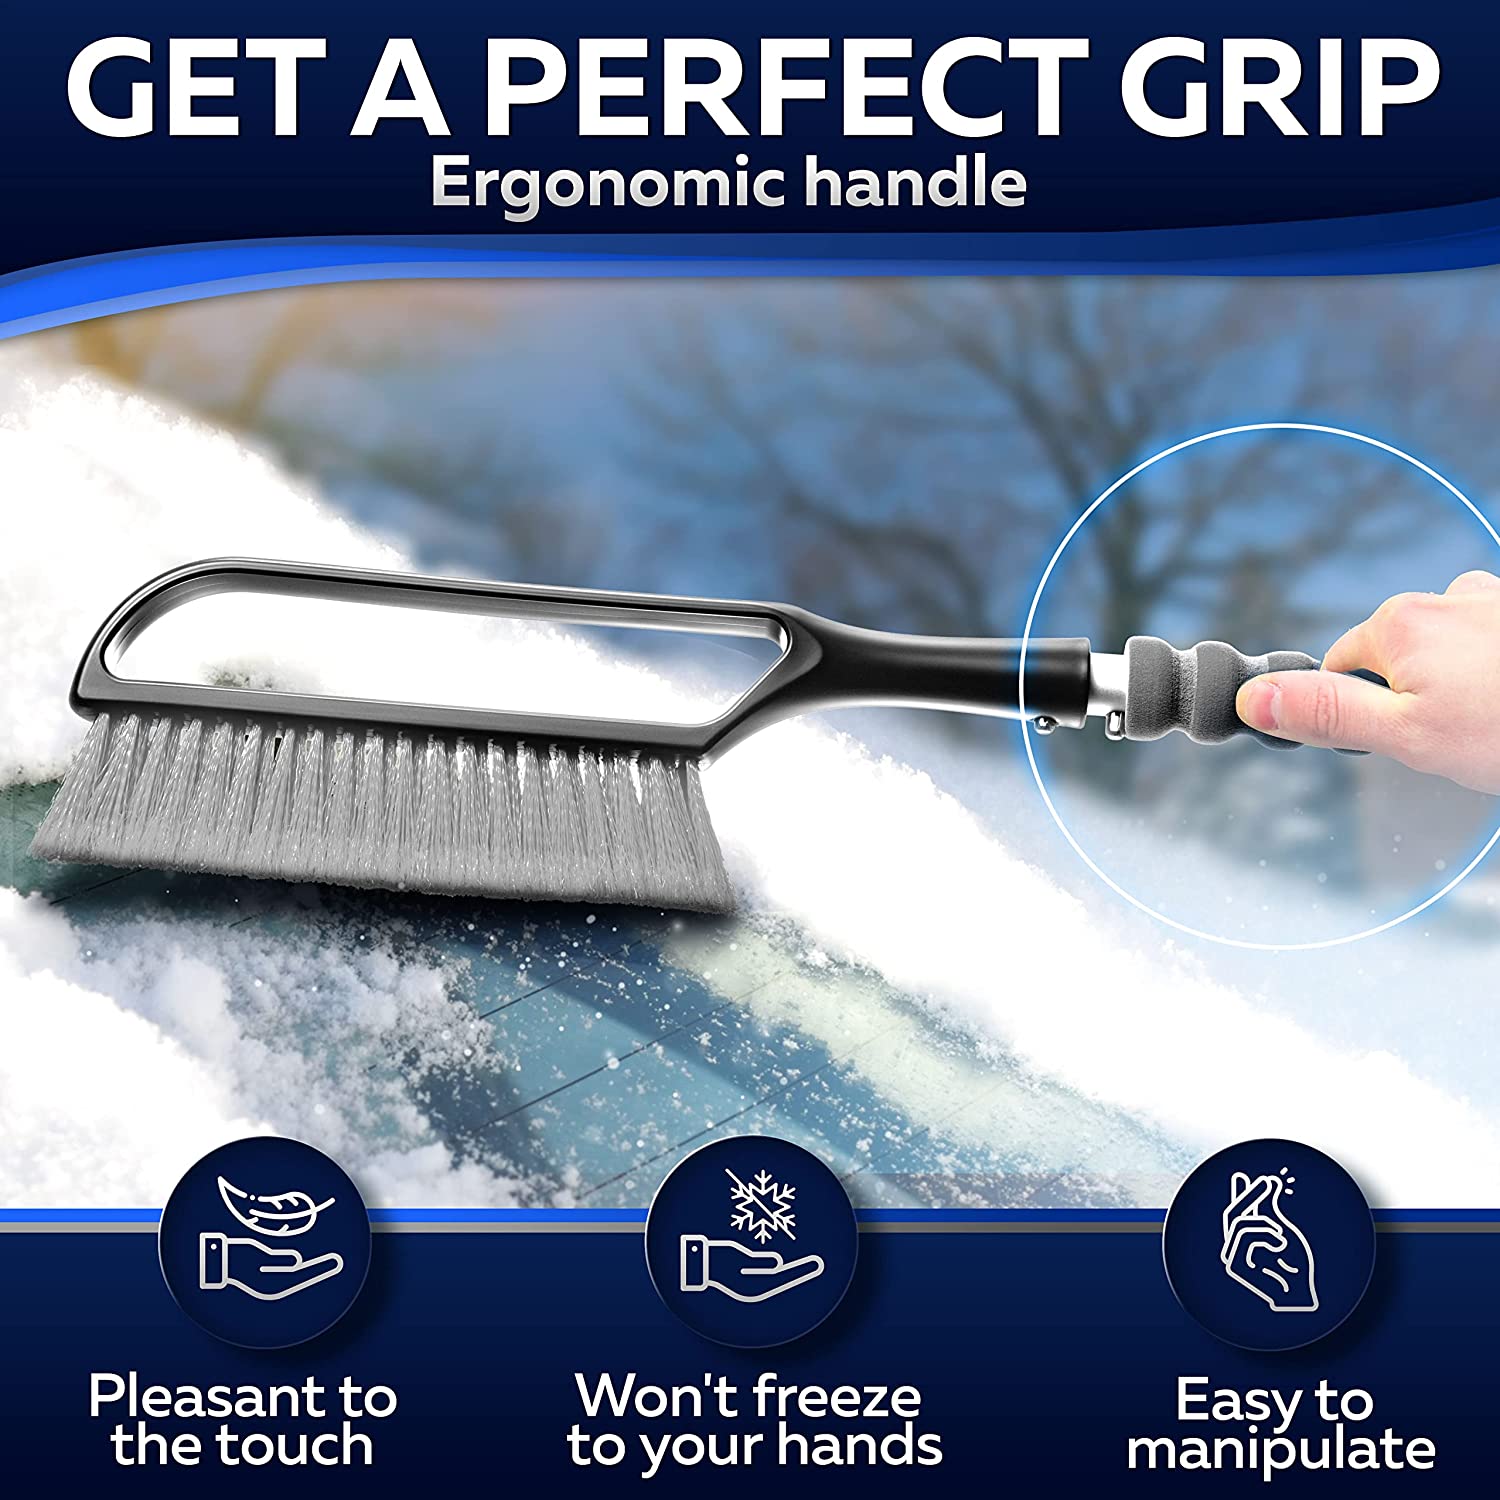 Ice Scraper Car Ice Scraper, Car Scraper Windscreen Scraper, 3 Pack Car  Window Scraper With Foam Handle, Frost And Snow Removal Tool For Window,  Car S